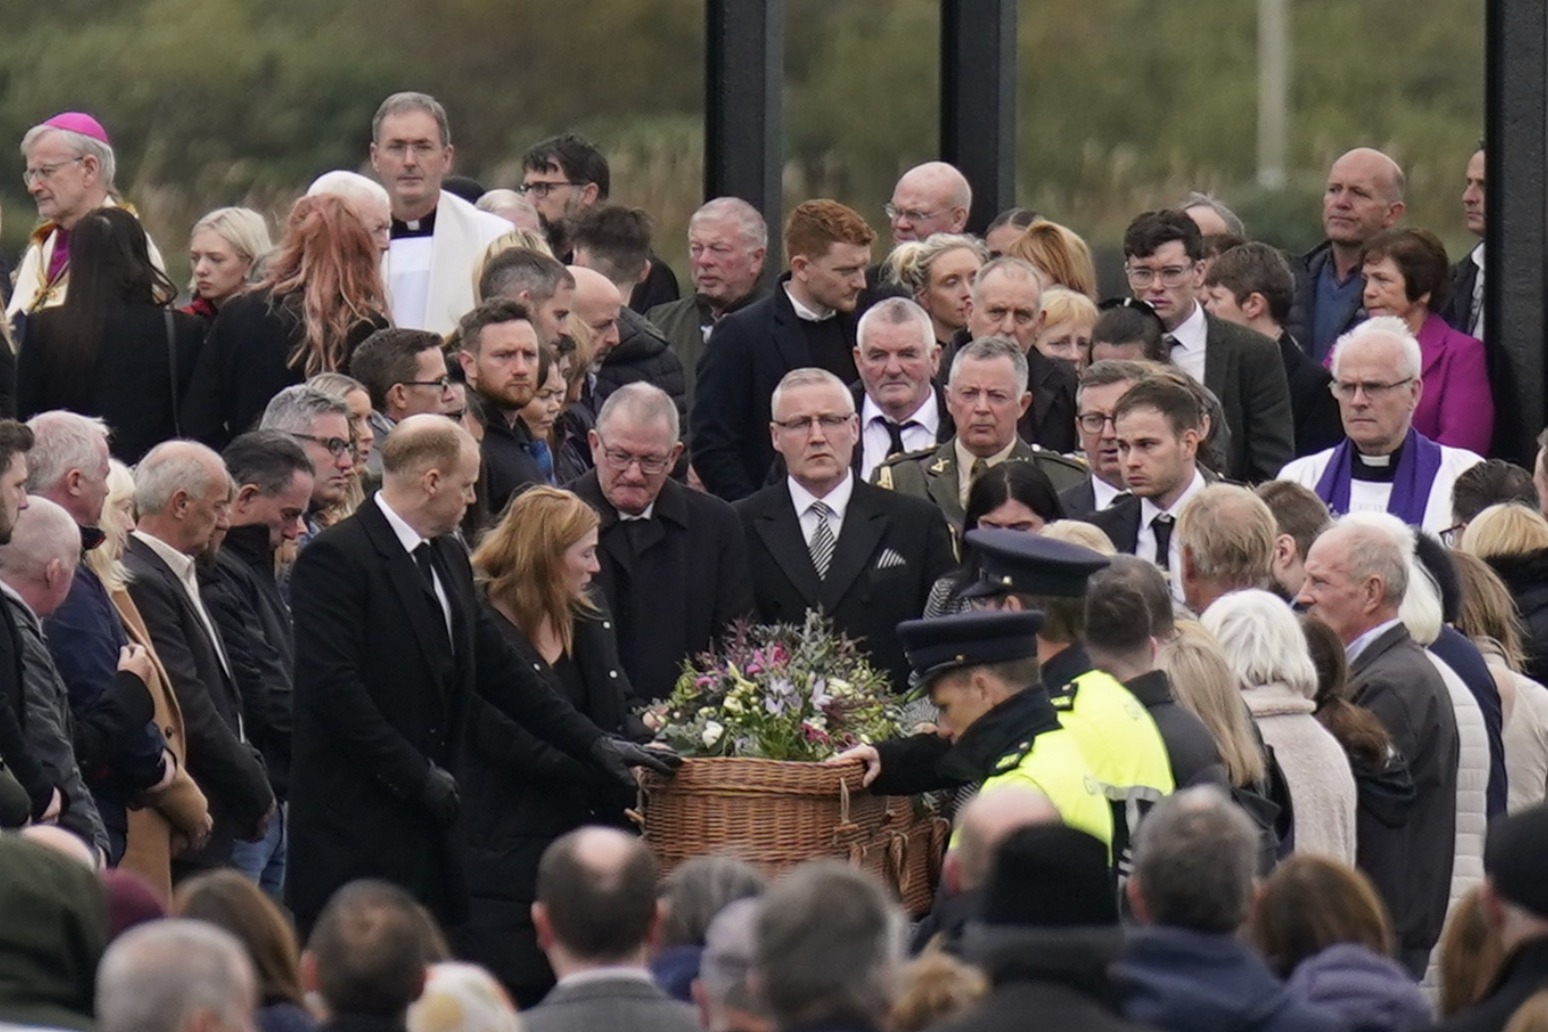 Creeslough blast victim remembered at funeral for her ‘love’ and ‘kindness’ 